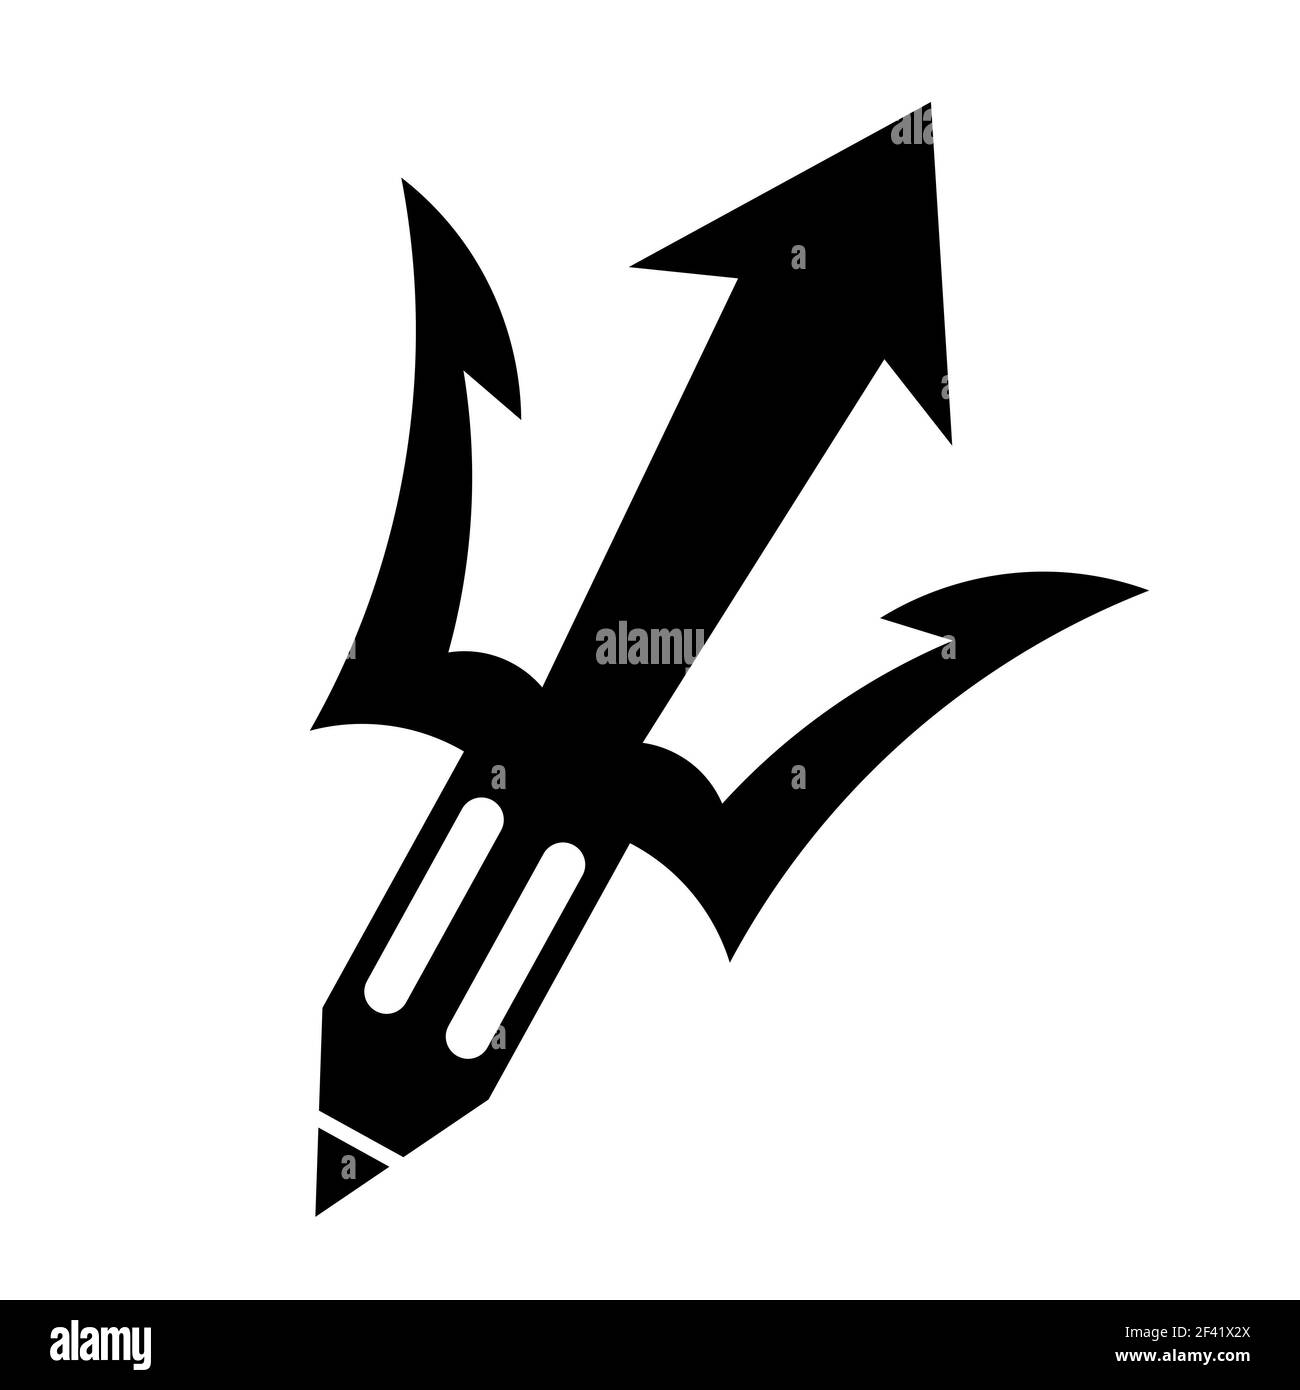 Vector illustration of a black trident symbol writer with a pencil logo design element Stock Photo